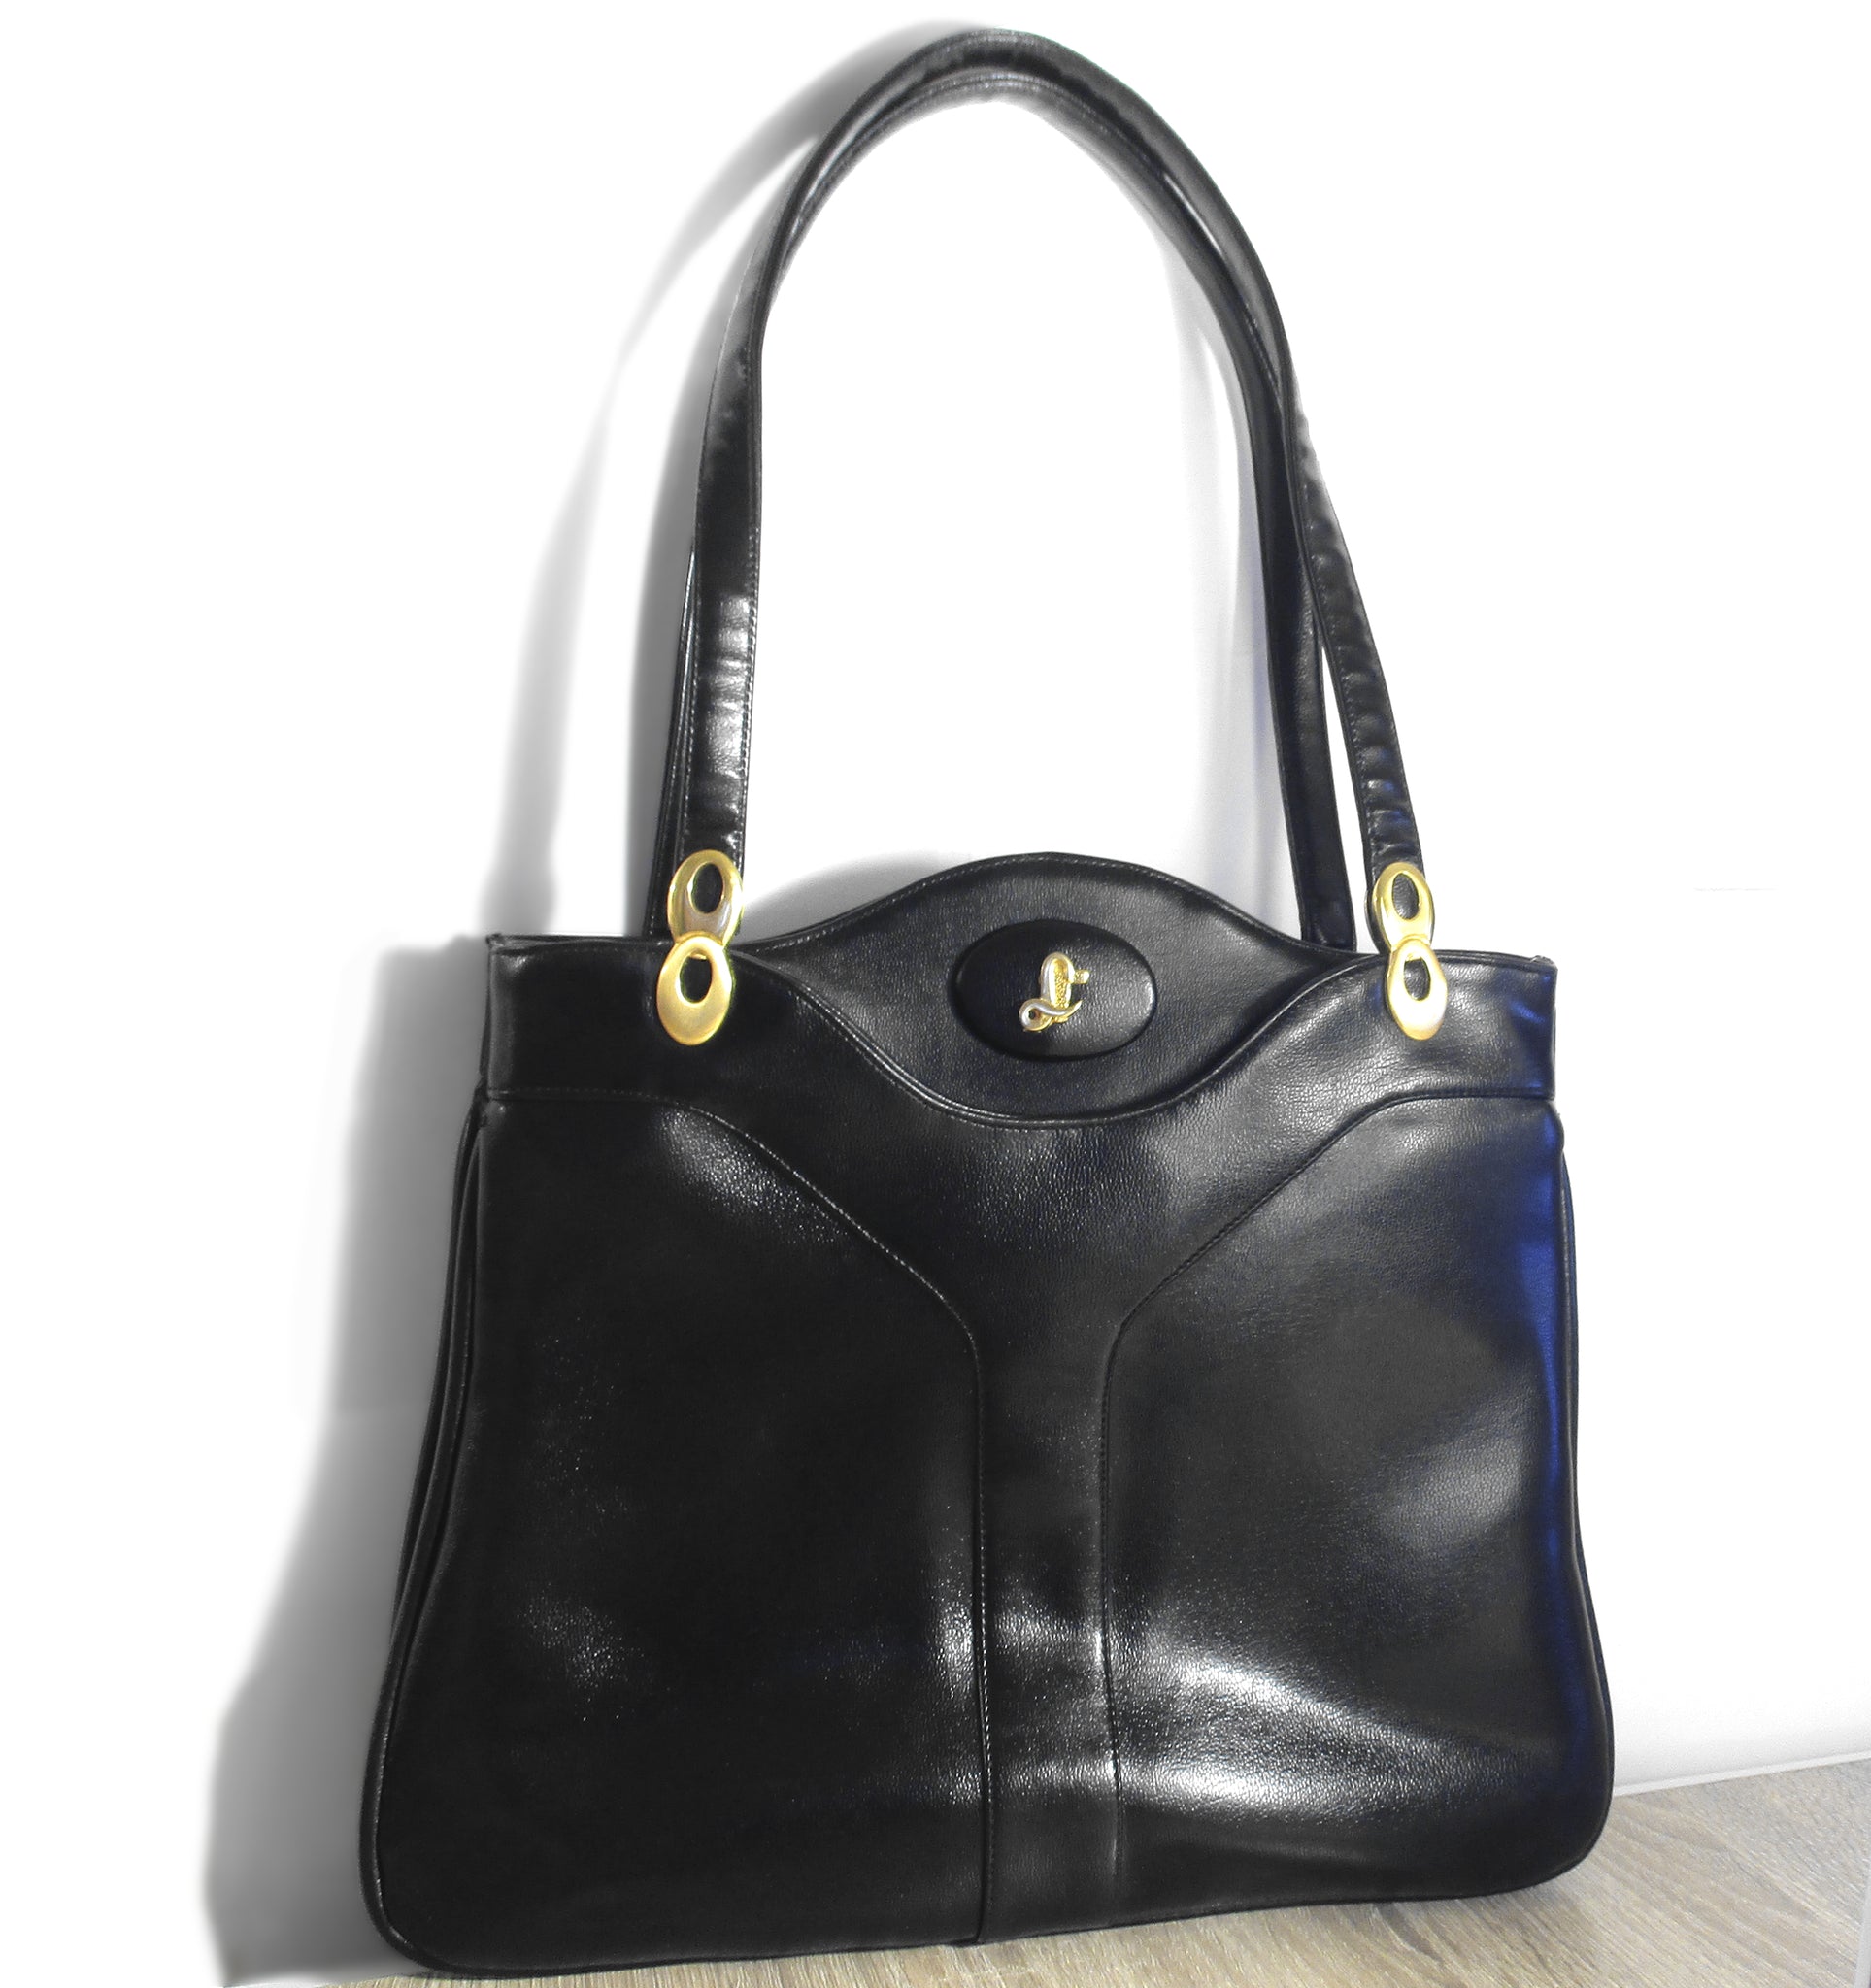 Lussac Tote Bag – Lord & Taylor